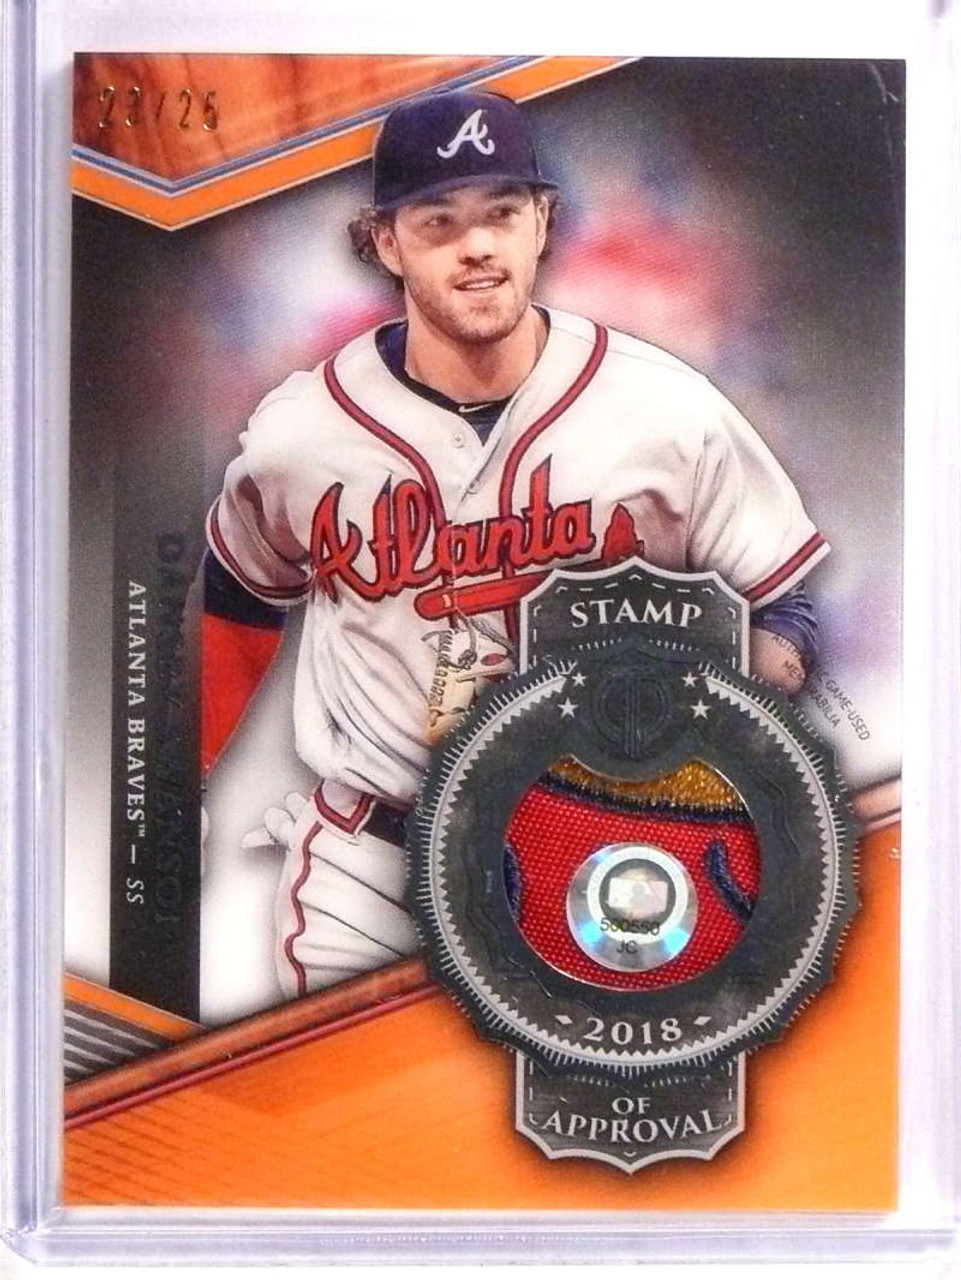 2018 Topps Tribute Stamp Orange Dansby Swanson 3 color patch #D23/25 *72498  - Sportsnut Cards